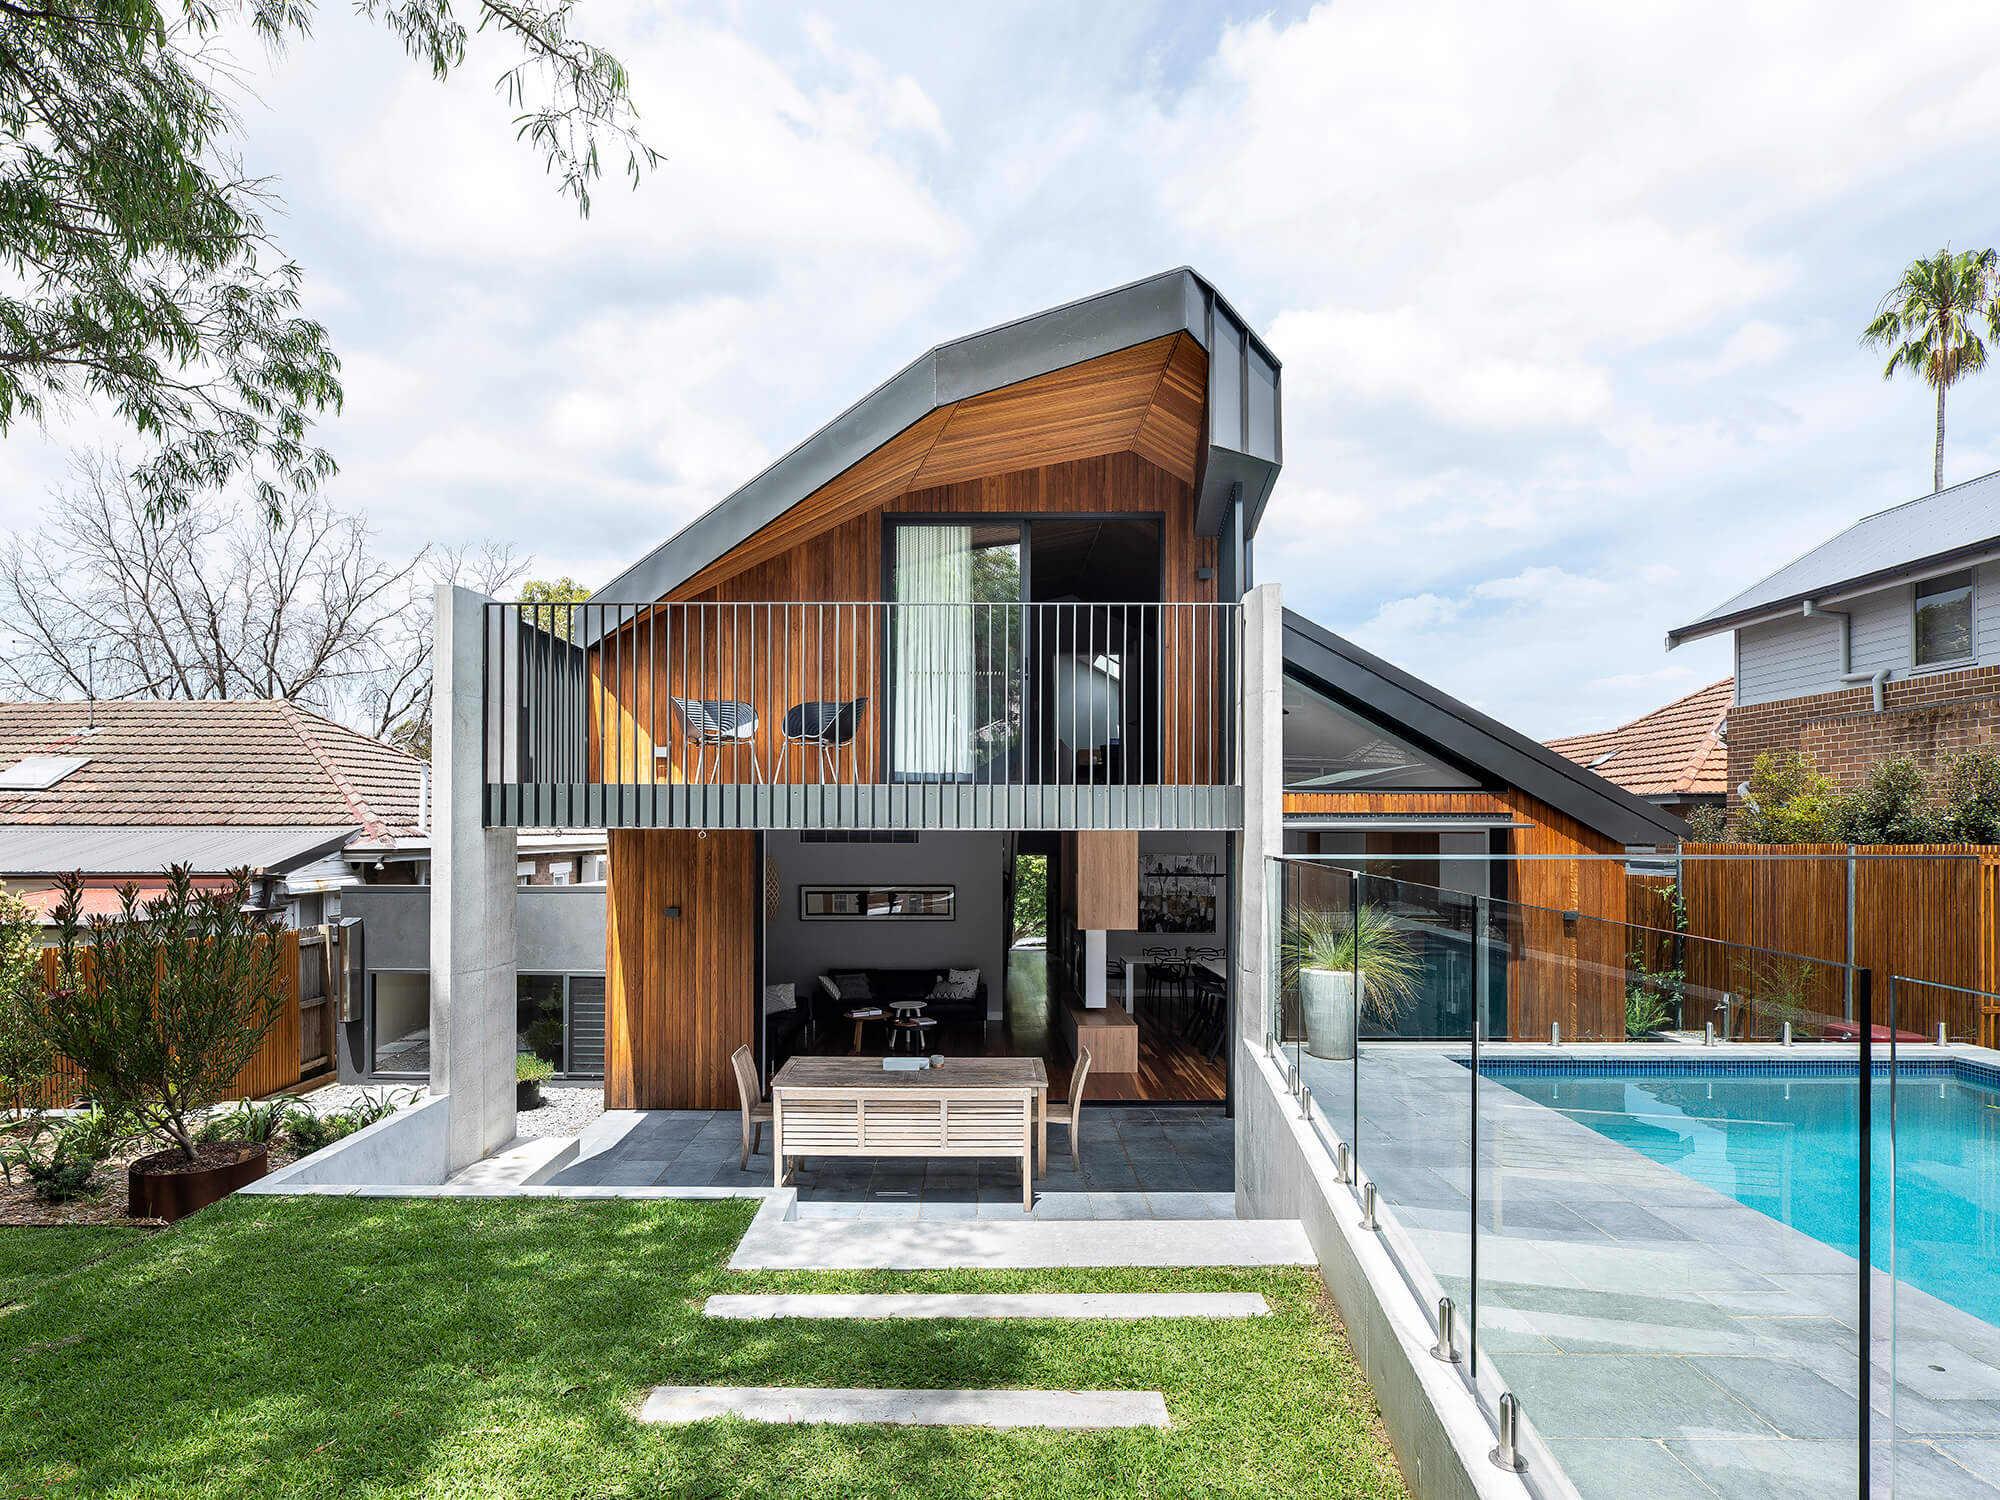 Stealth House by Bijl Architecture. Rear façade view, outdoor entertainment space.